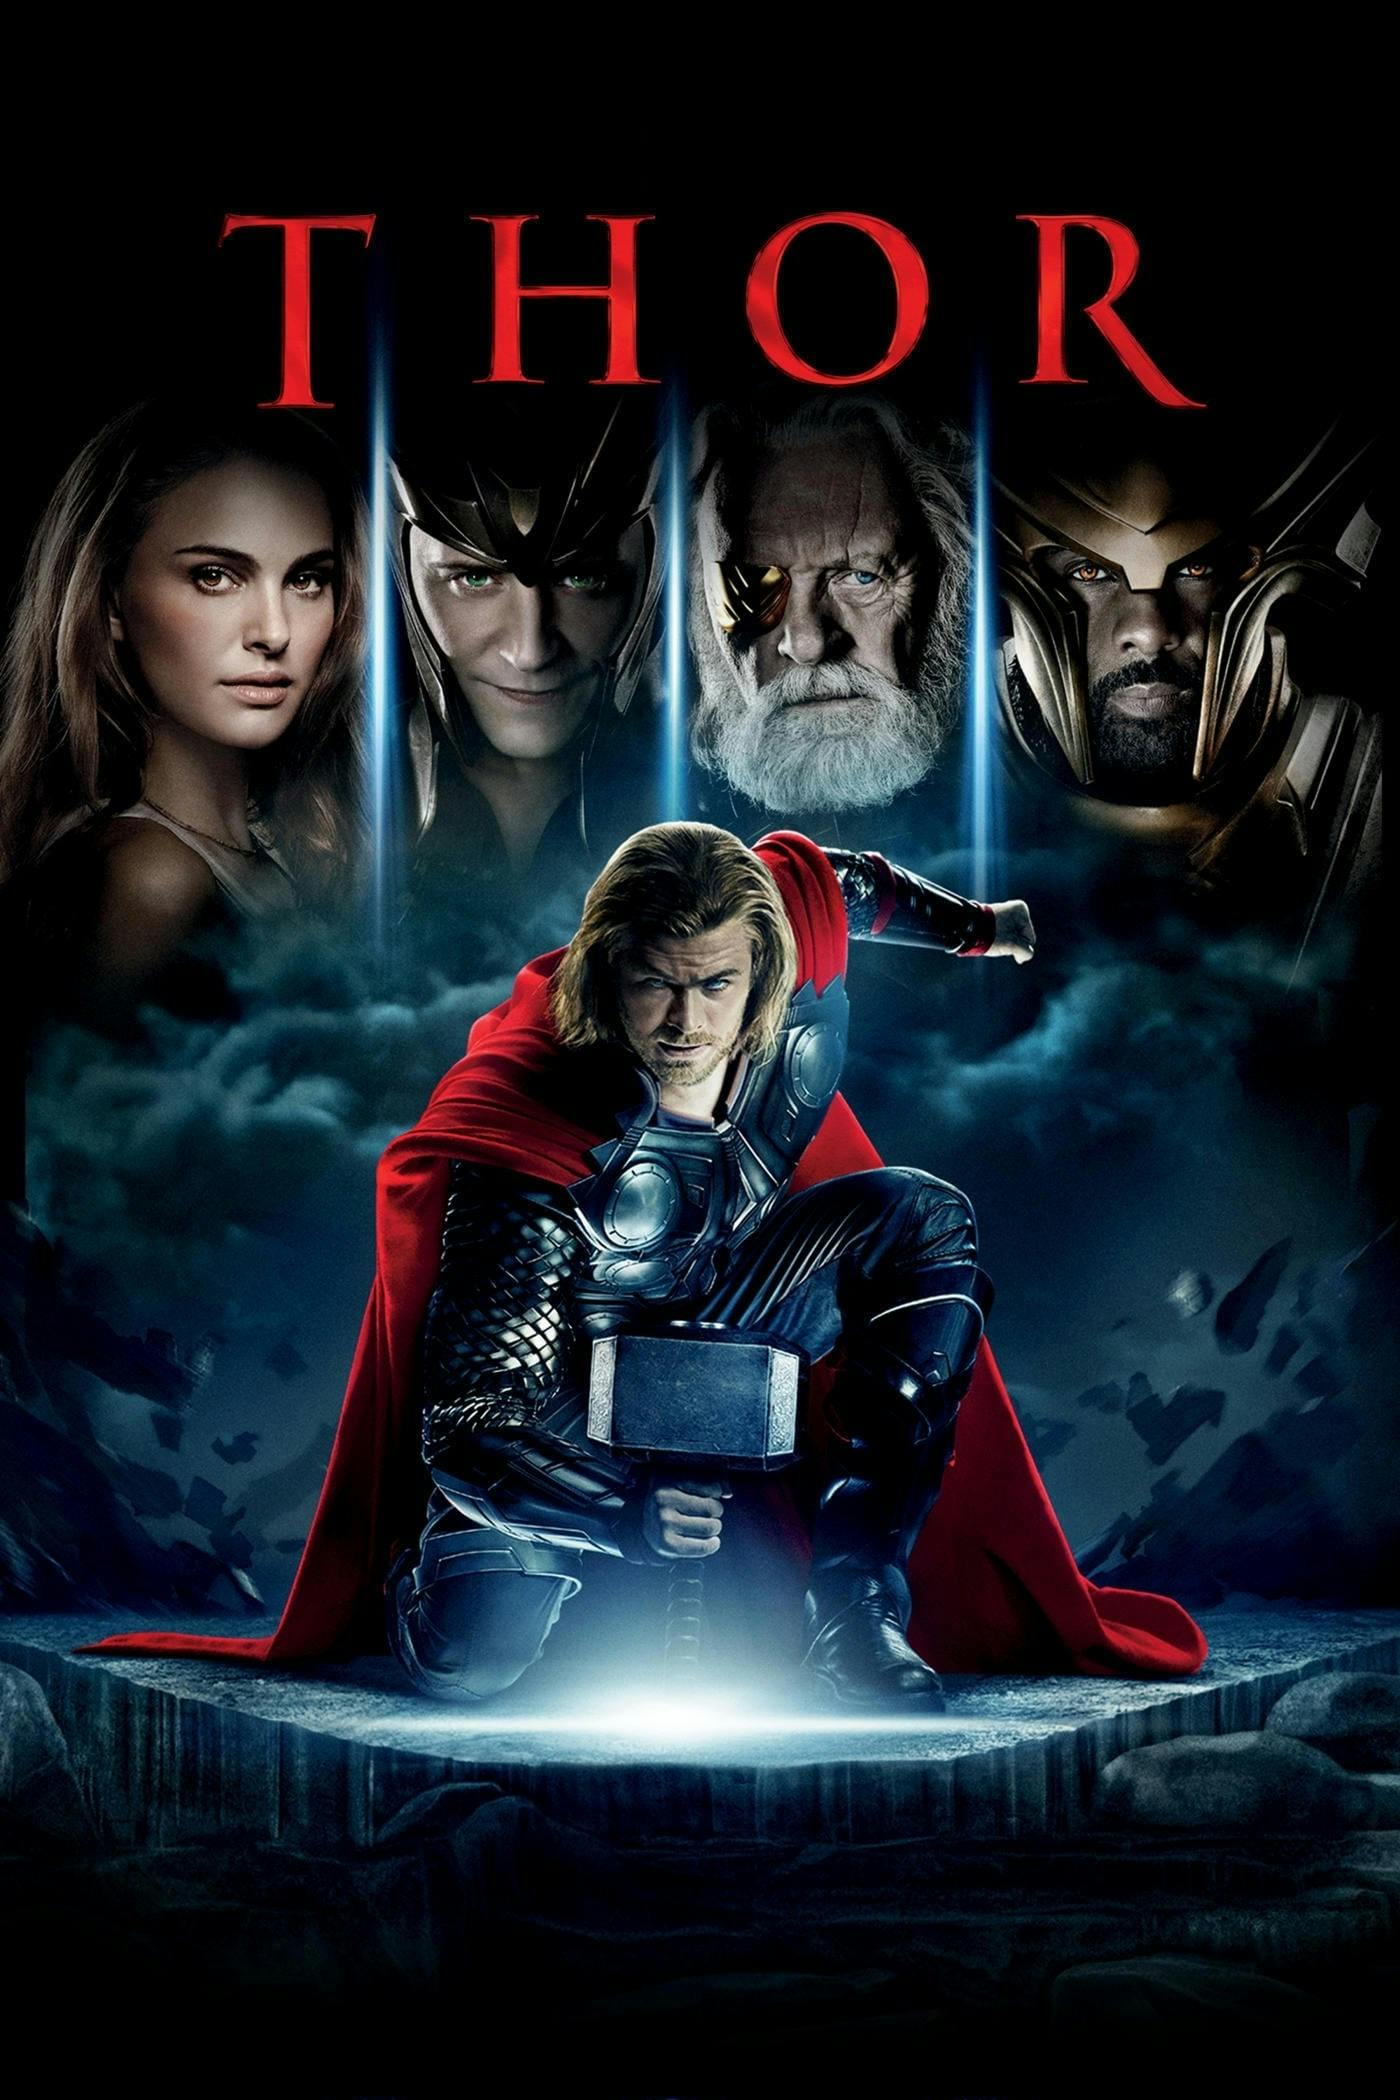 Best Chris Hemsworth movies to watch on Amazon or iTunes